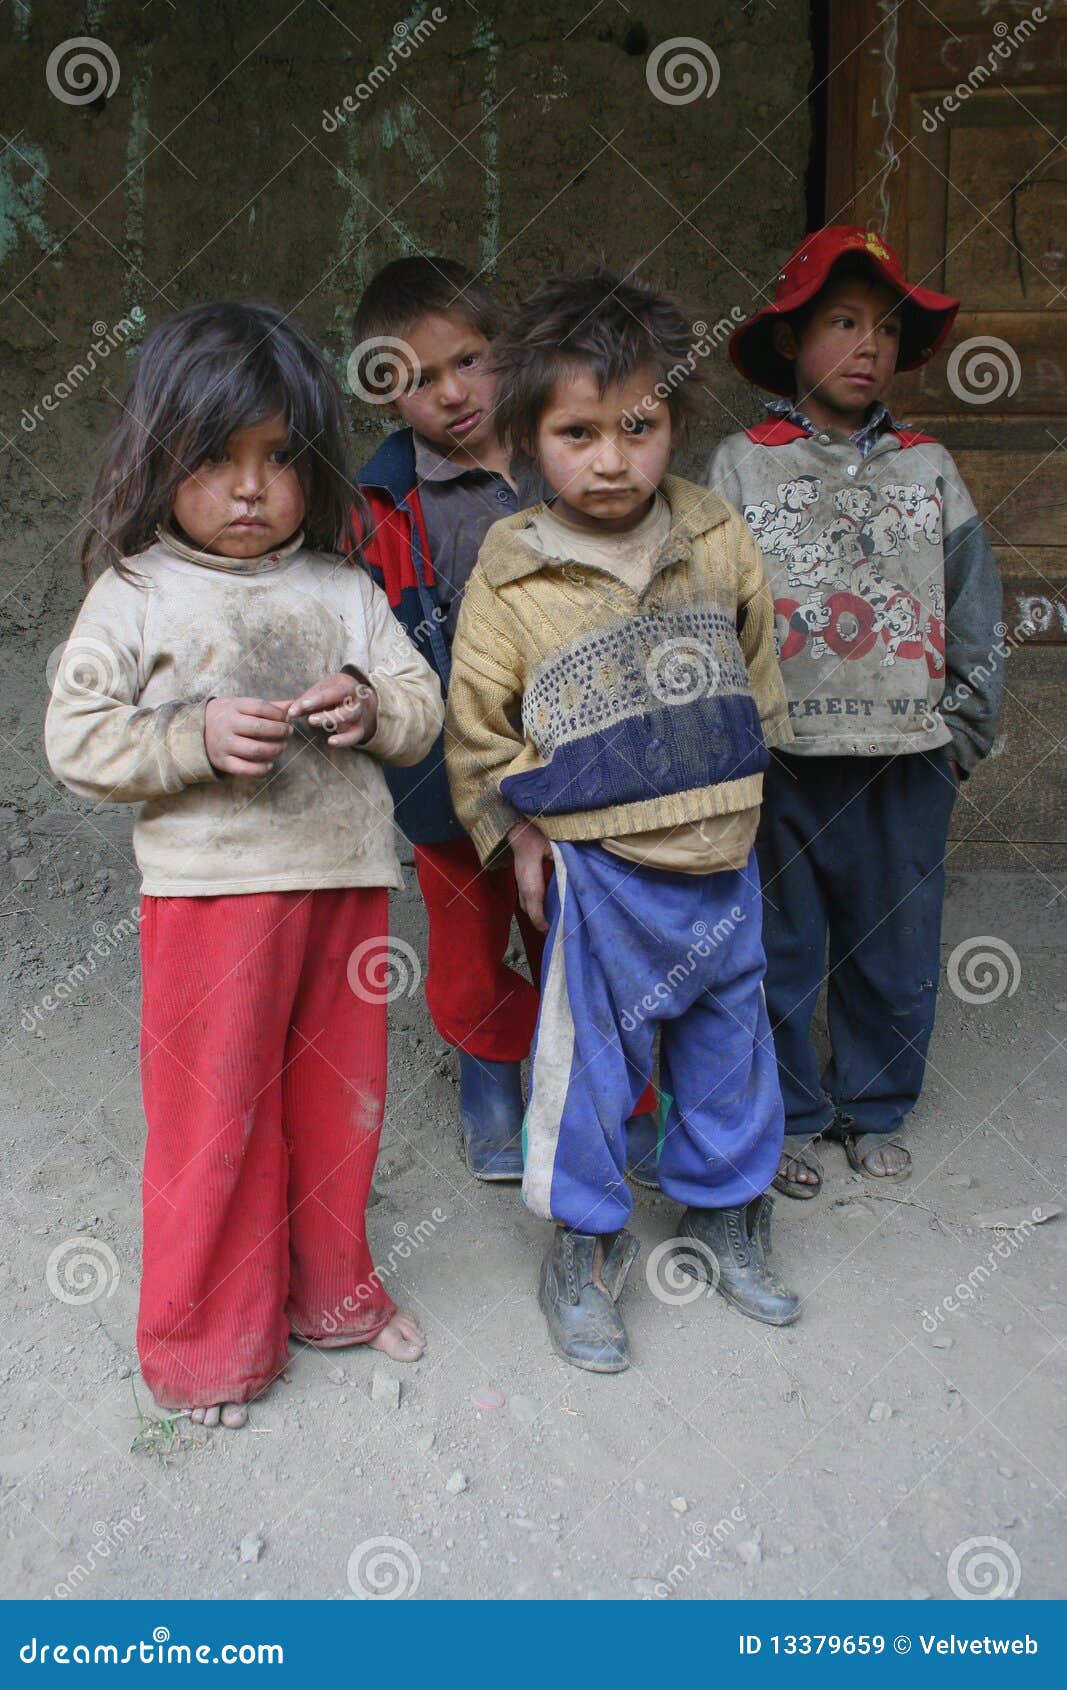 573 Homeless Street Kids Photos Free Royalty Free Stock Photos From Dreamstime